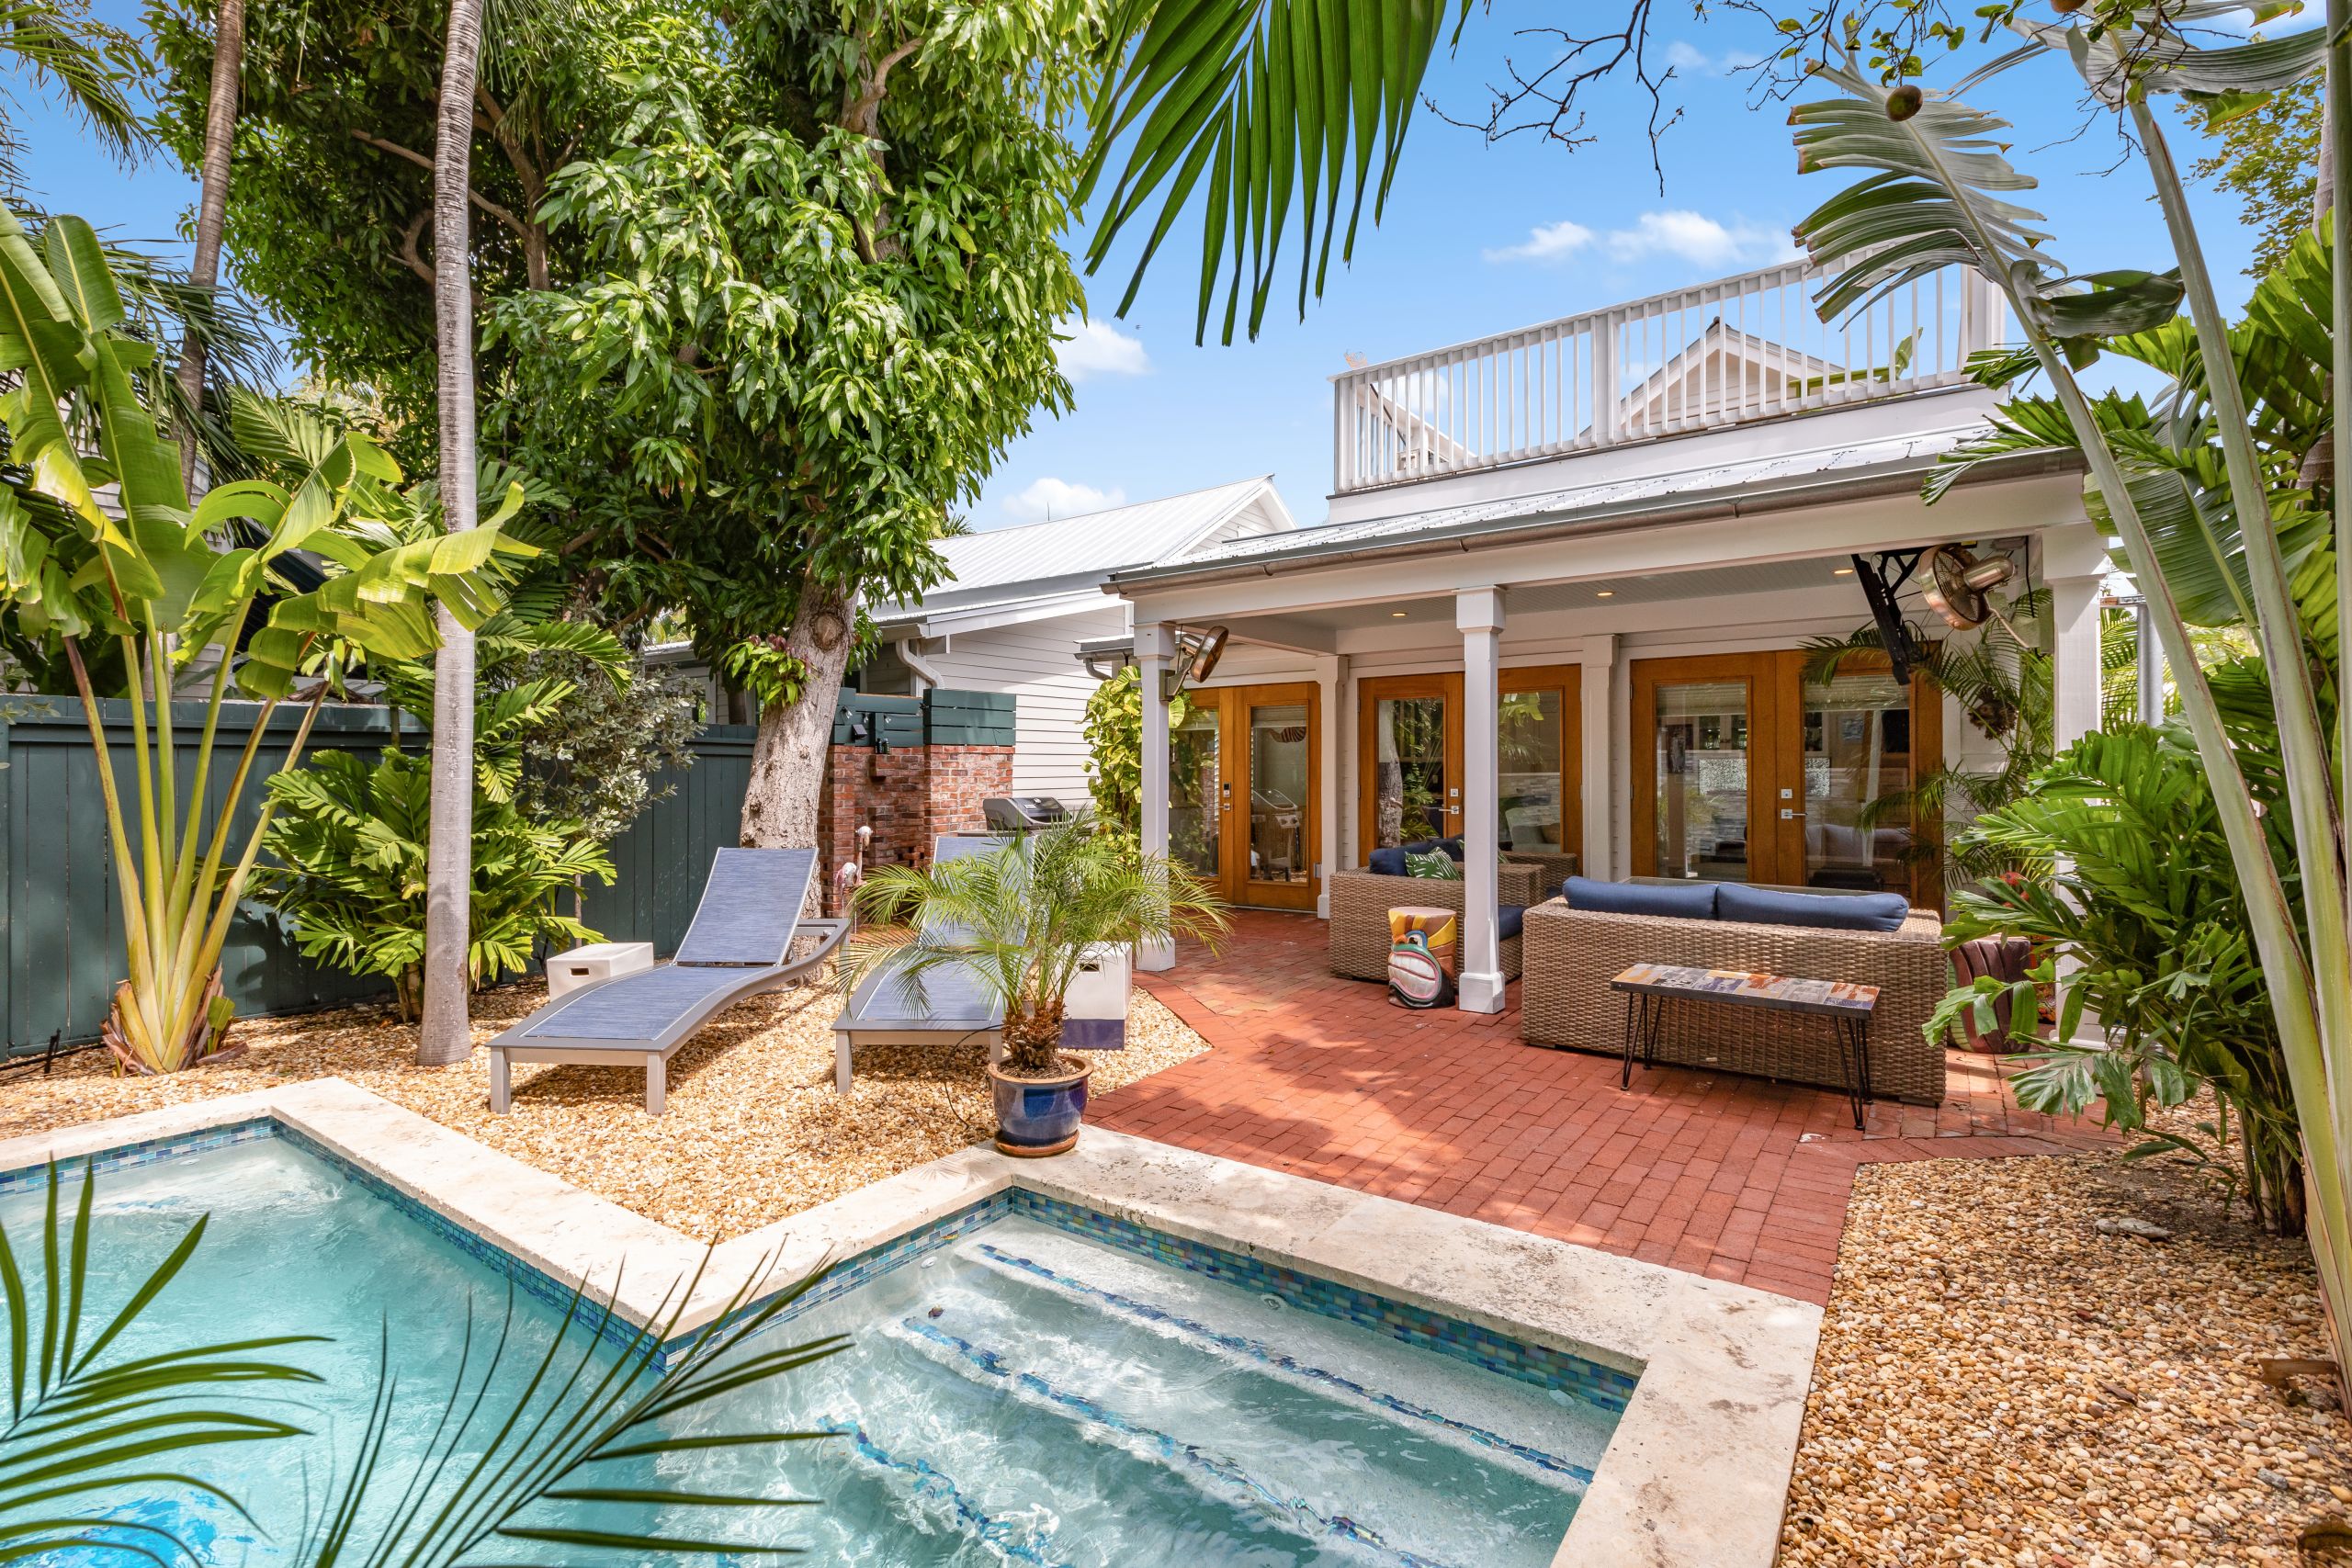 Ultimate Style in Old Town Key West - 1116 Packer St. - $2,450,000